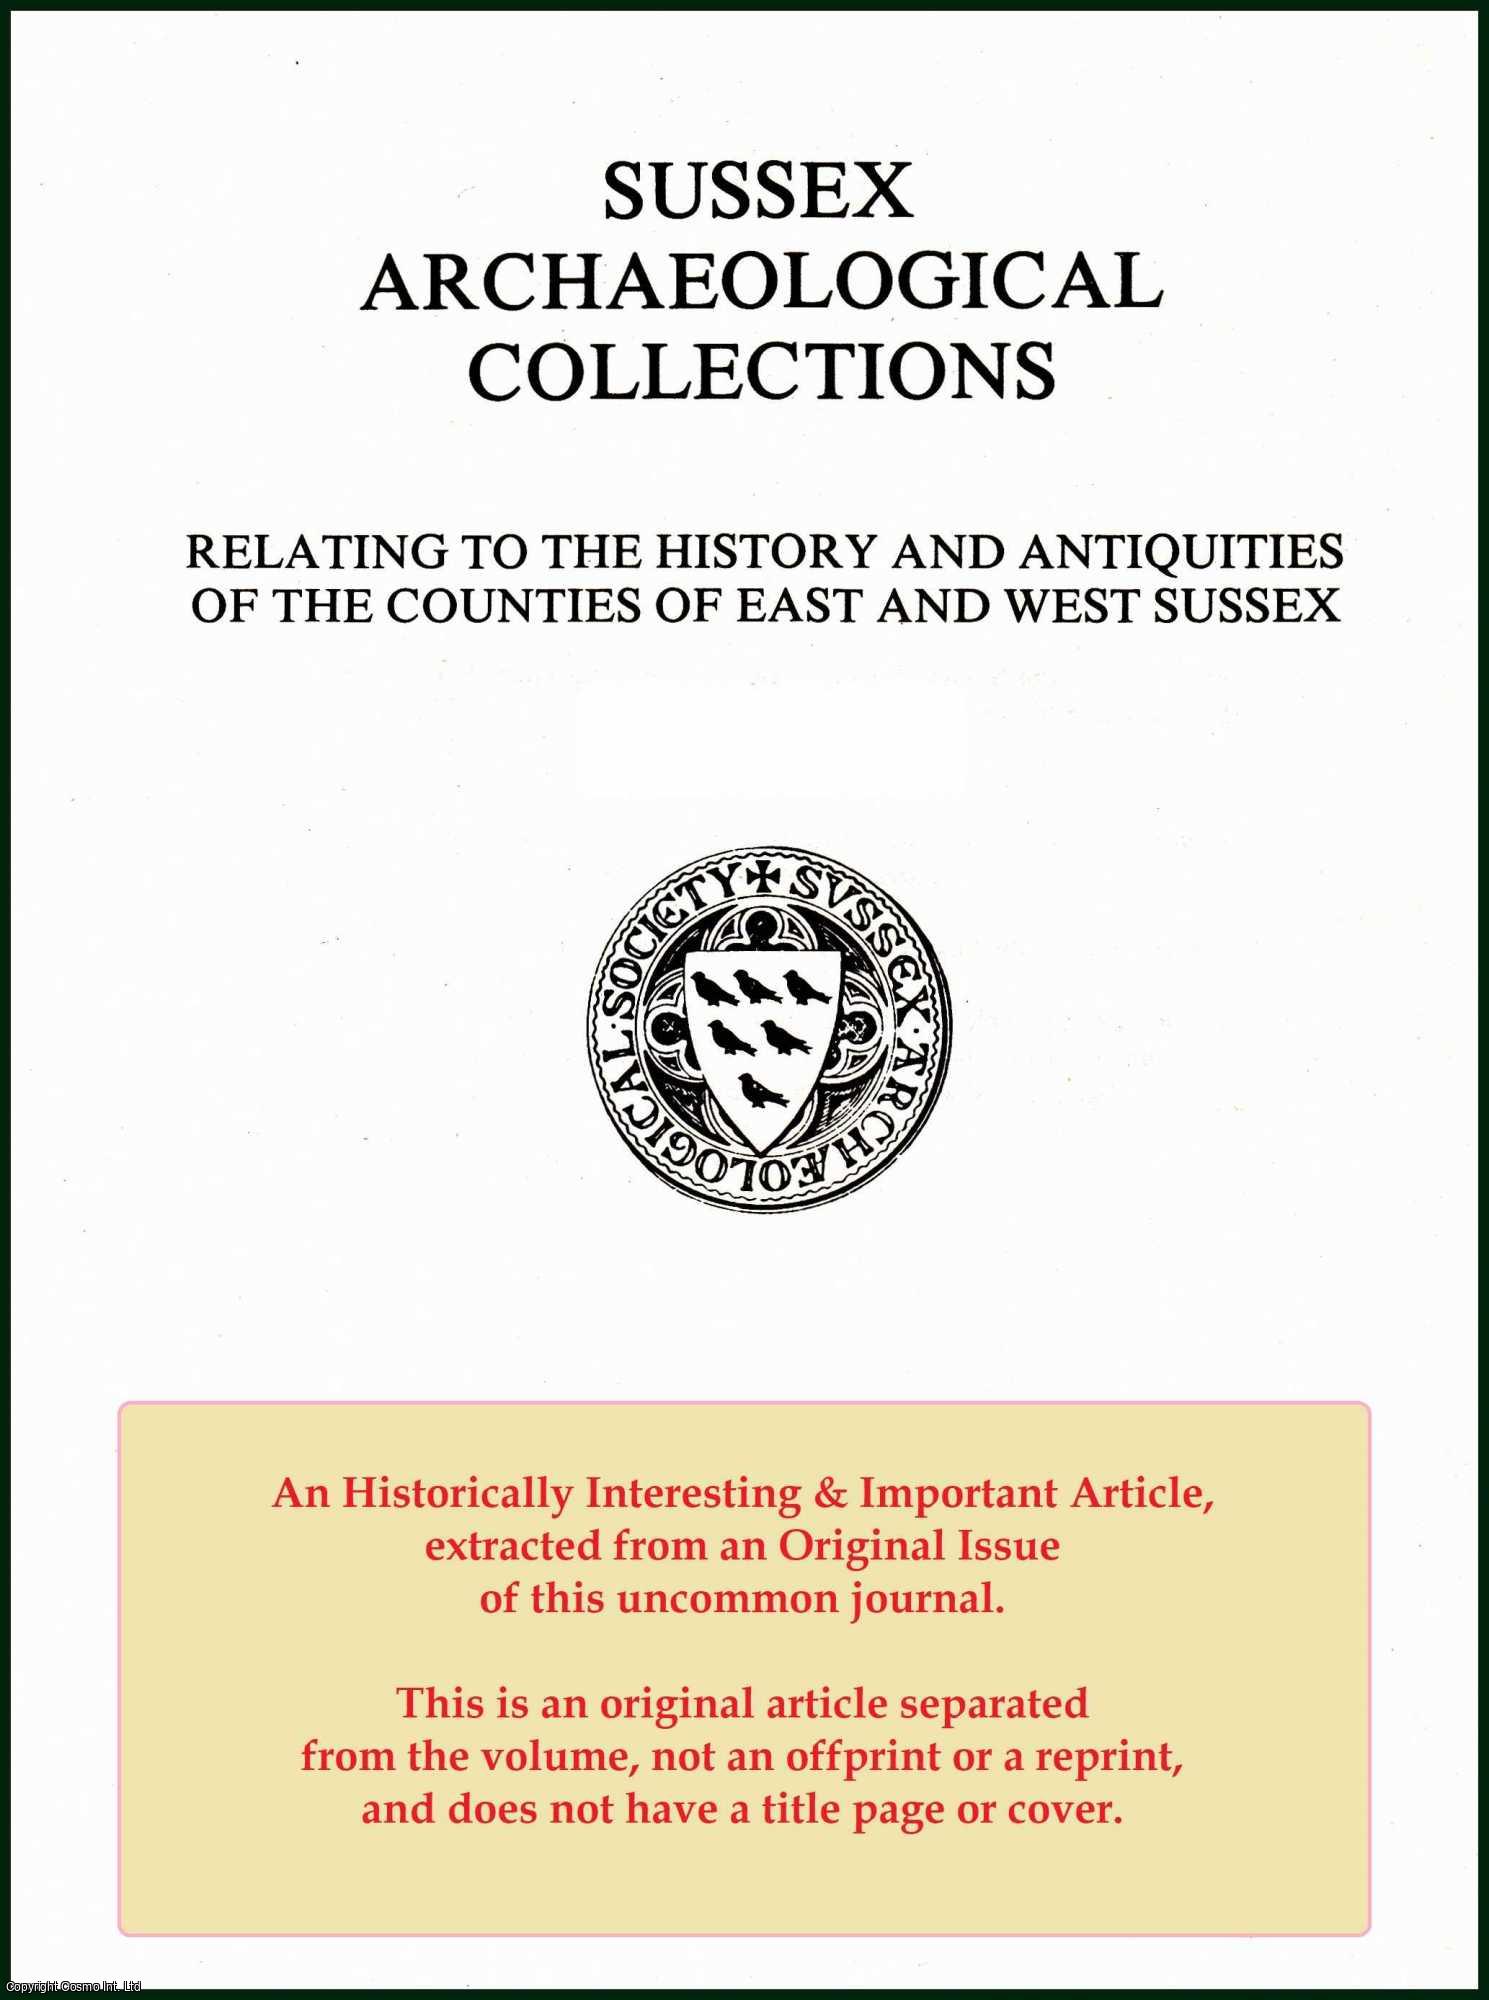 Adolphus Ballard - The Early Municipal Charters of The Sussex Boroughs. An original article from the Journal of the Sussex Archaeological Society, 1912.